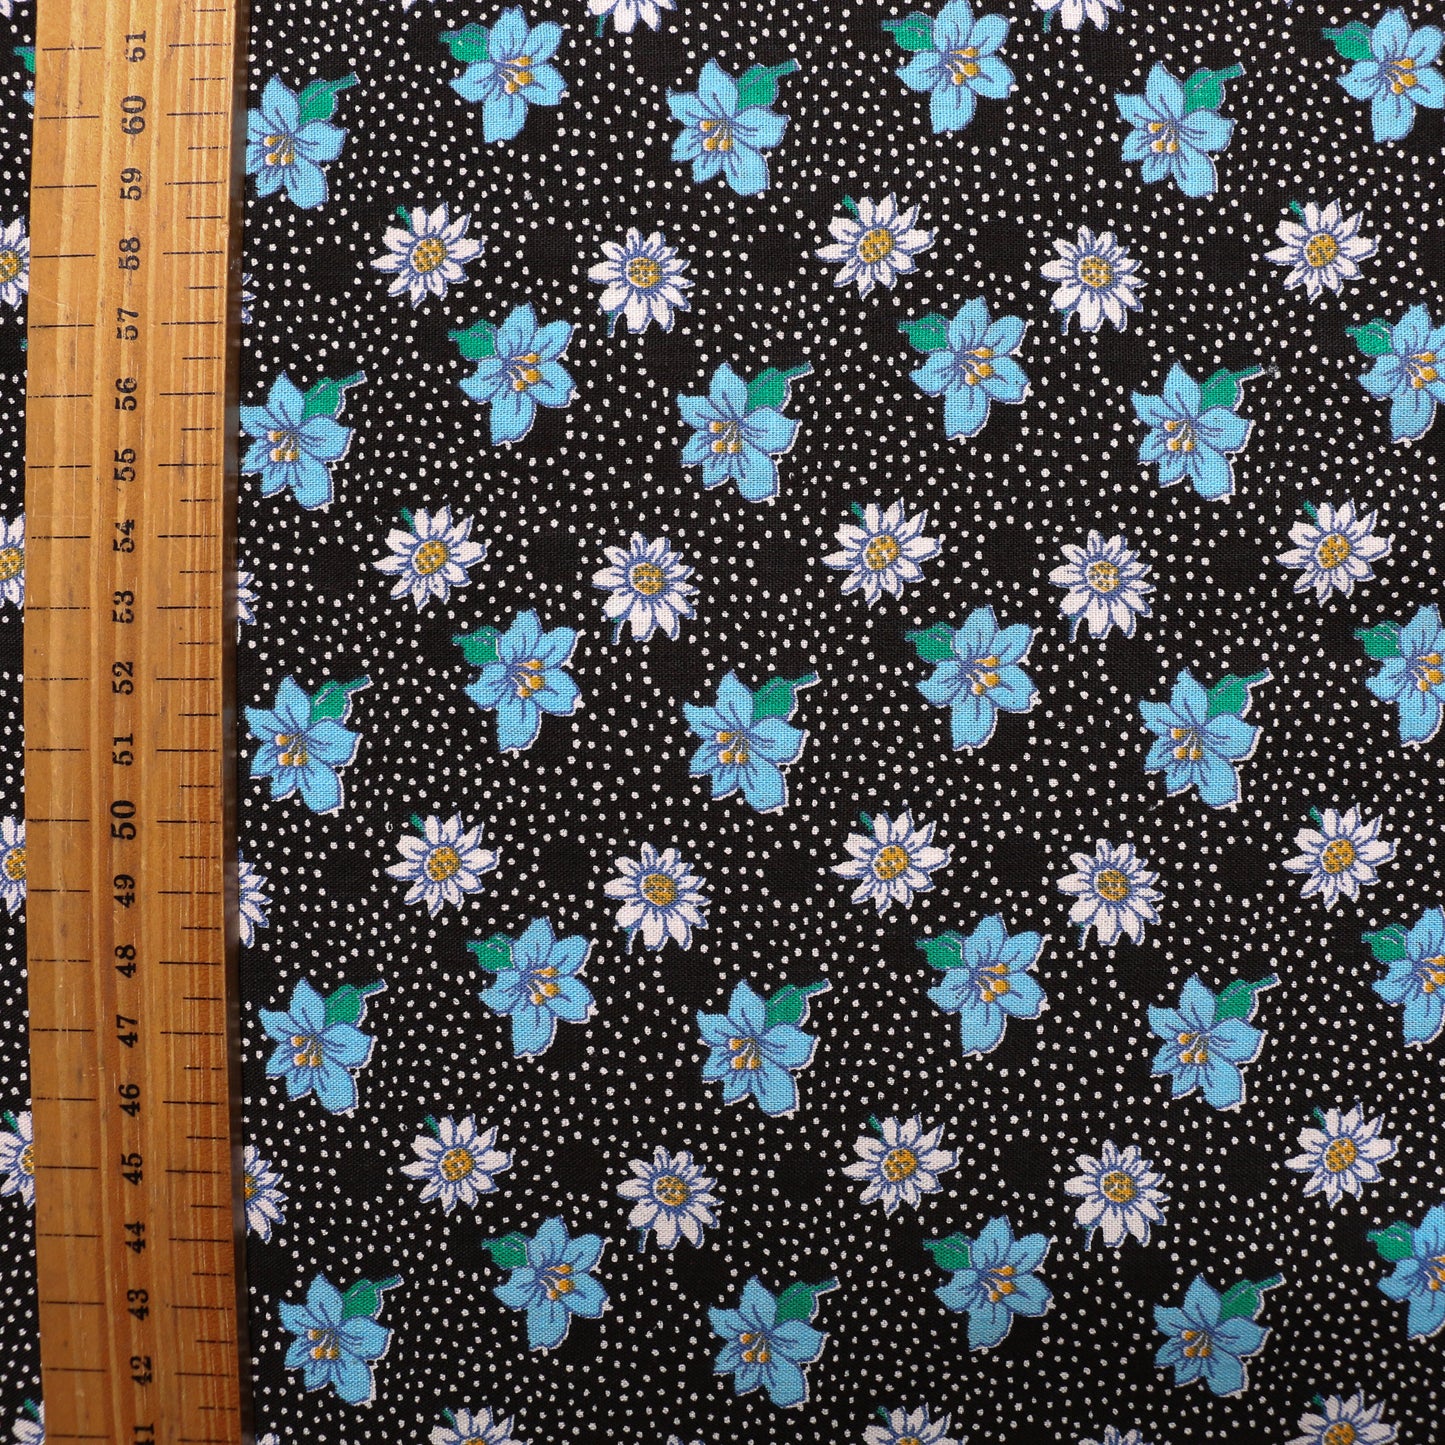 black sustainable vintage cotton dressmaking poplin fabric with blue white floral print